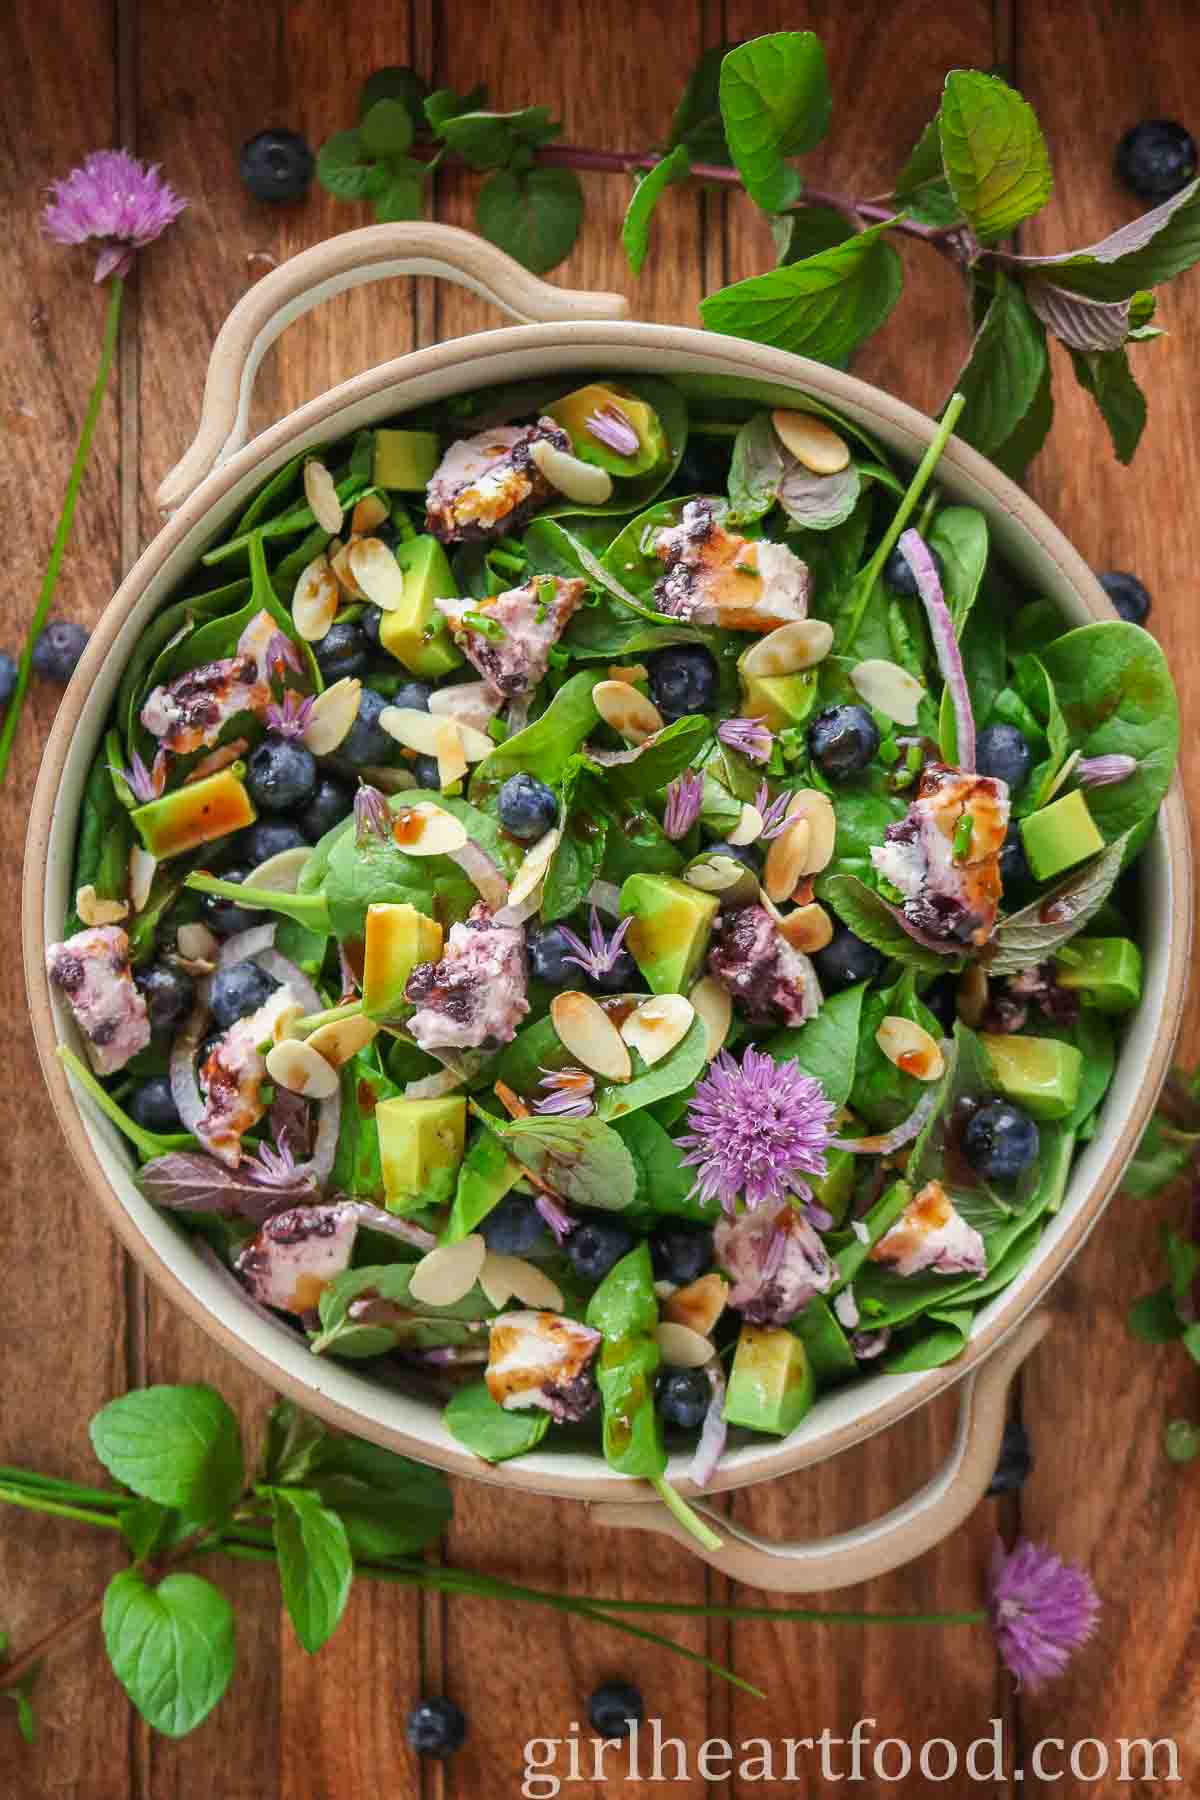 Dish of blueberry spinach salad drizzled with vinaigrette.